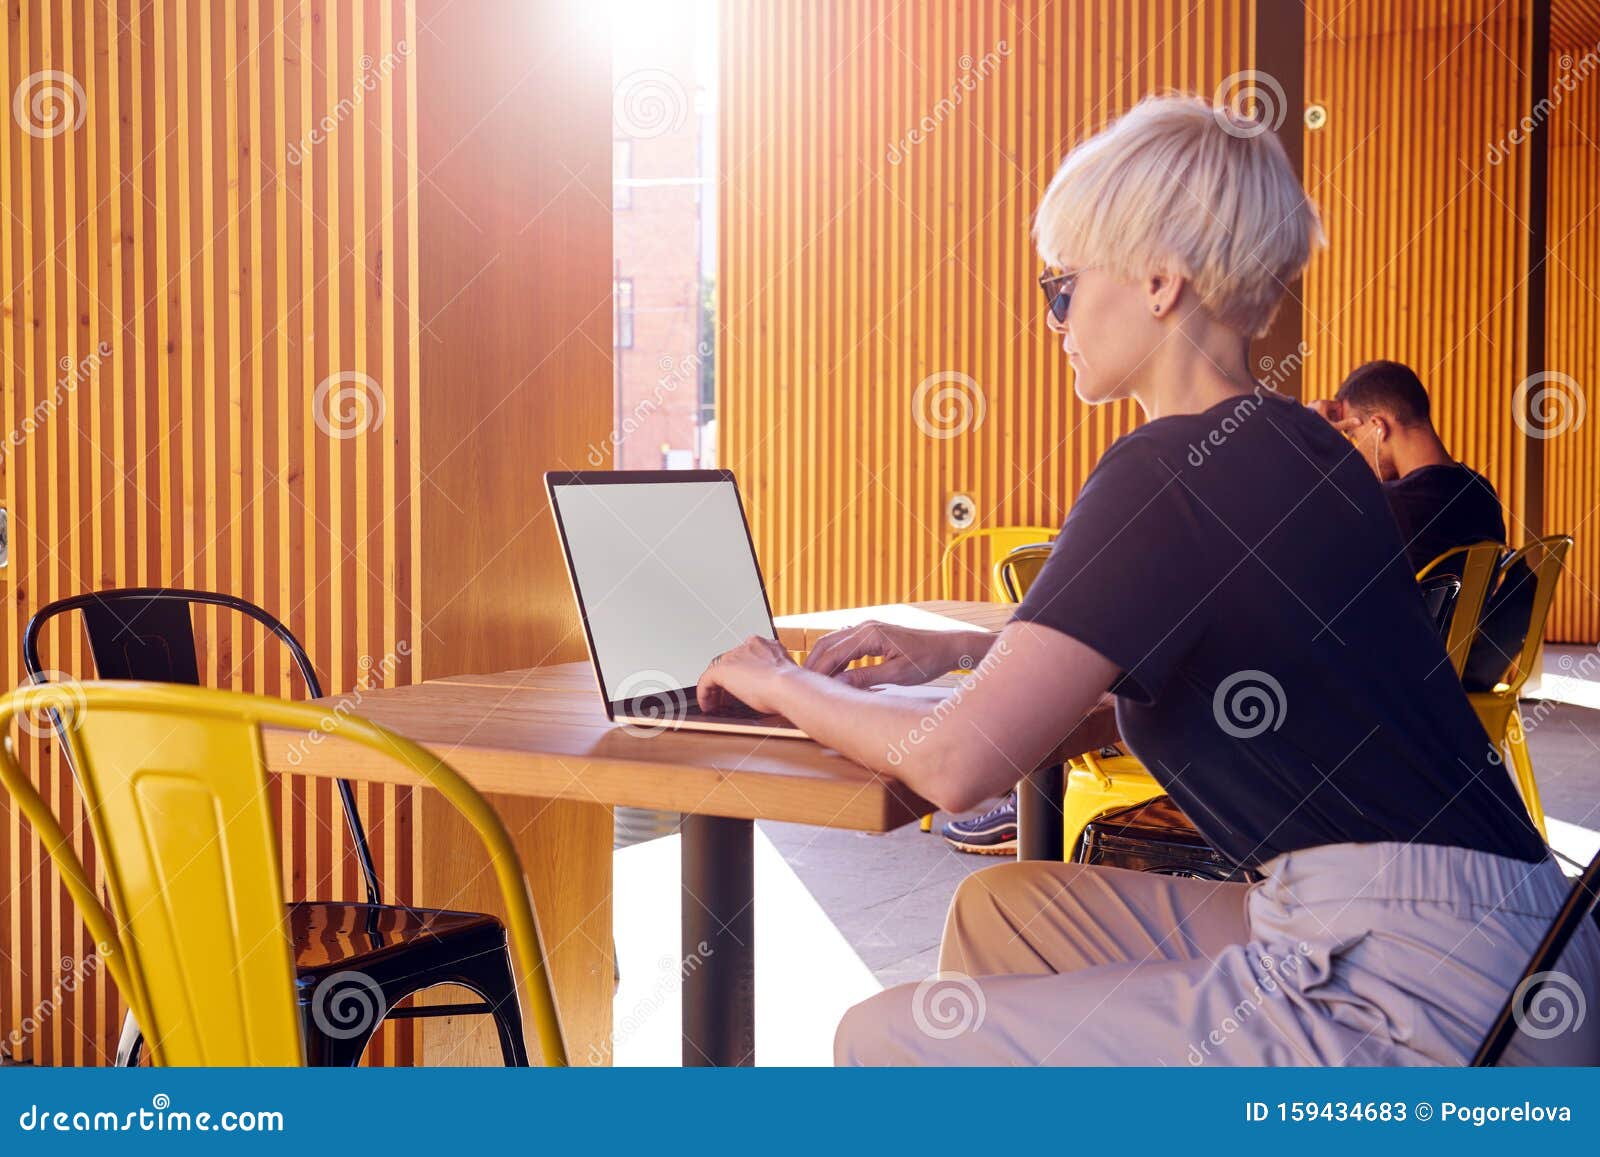 Woman with Short Hair Working on Laptop, Screen Space for Design Layout ...